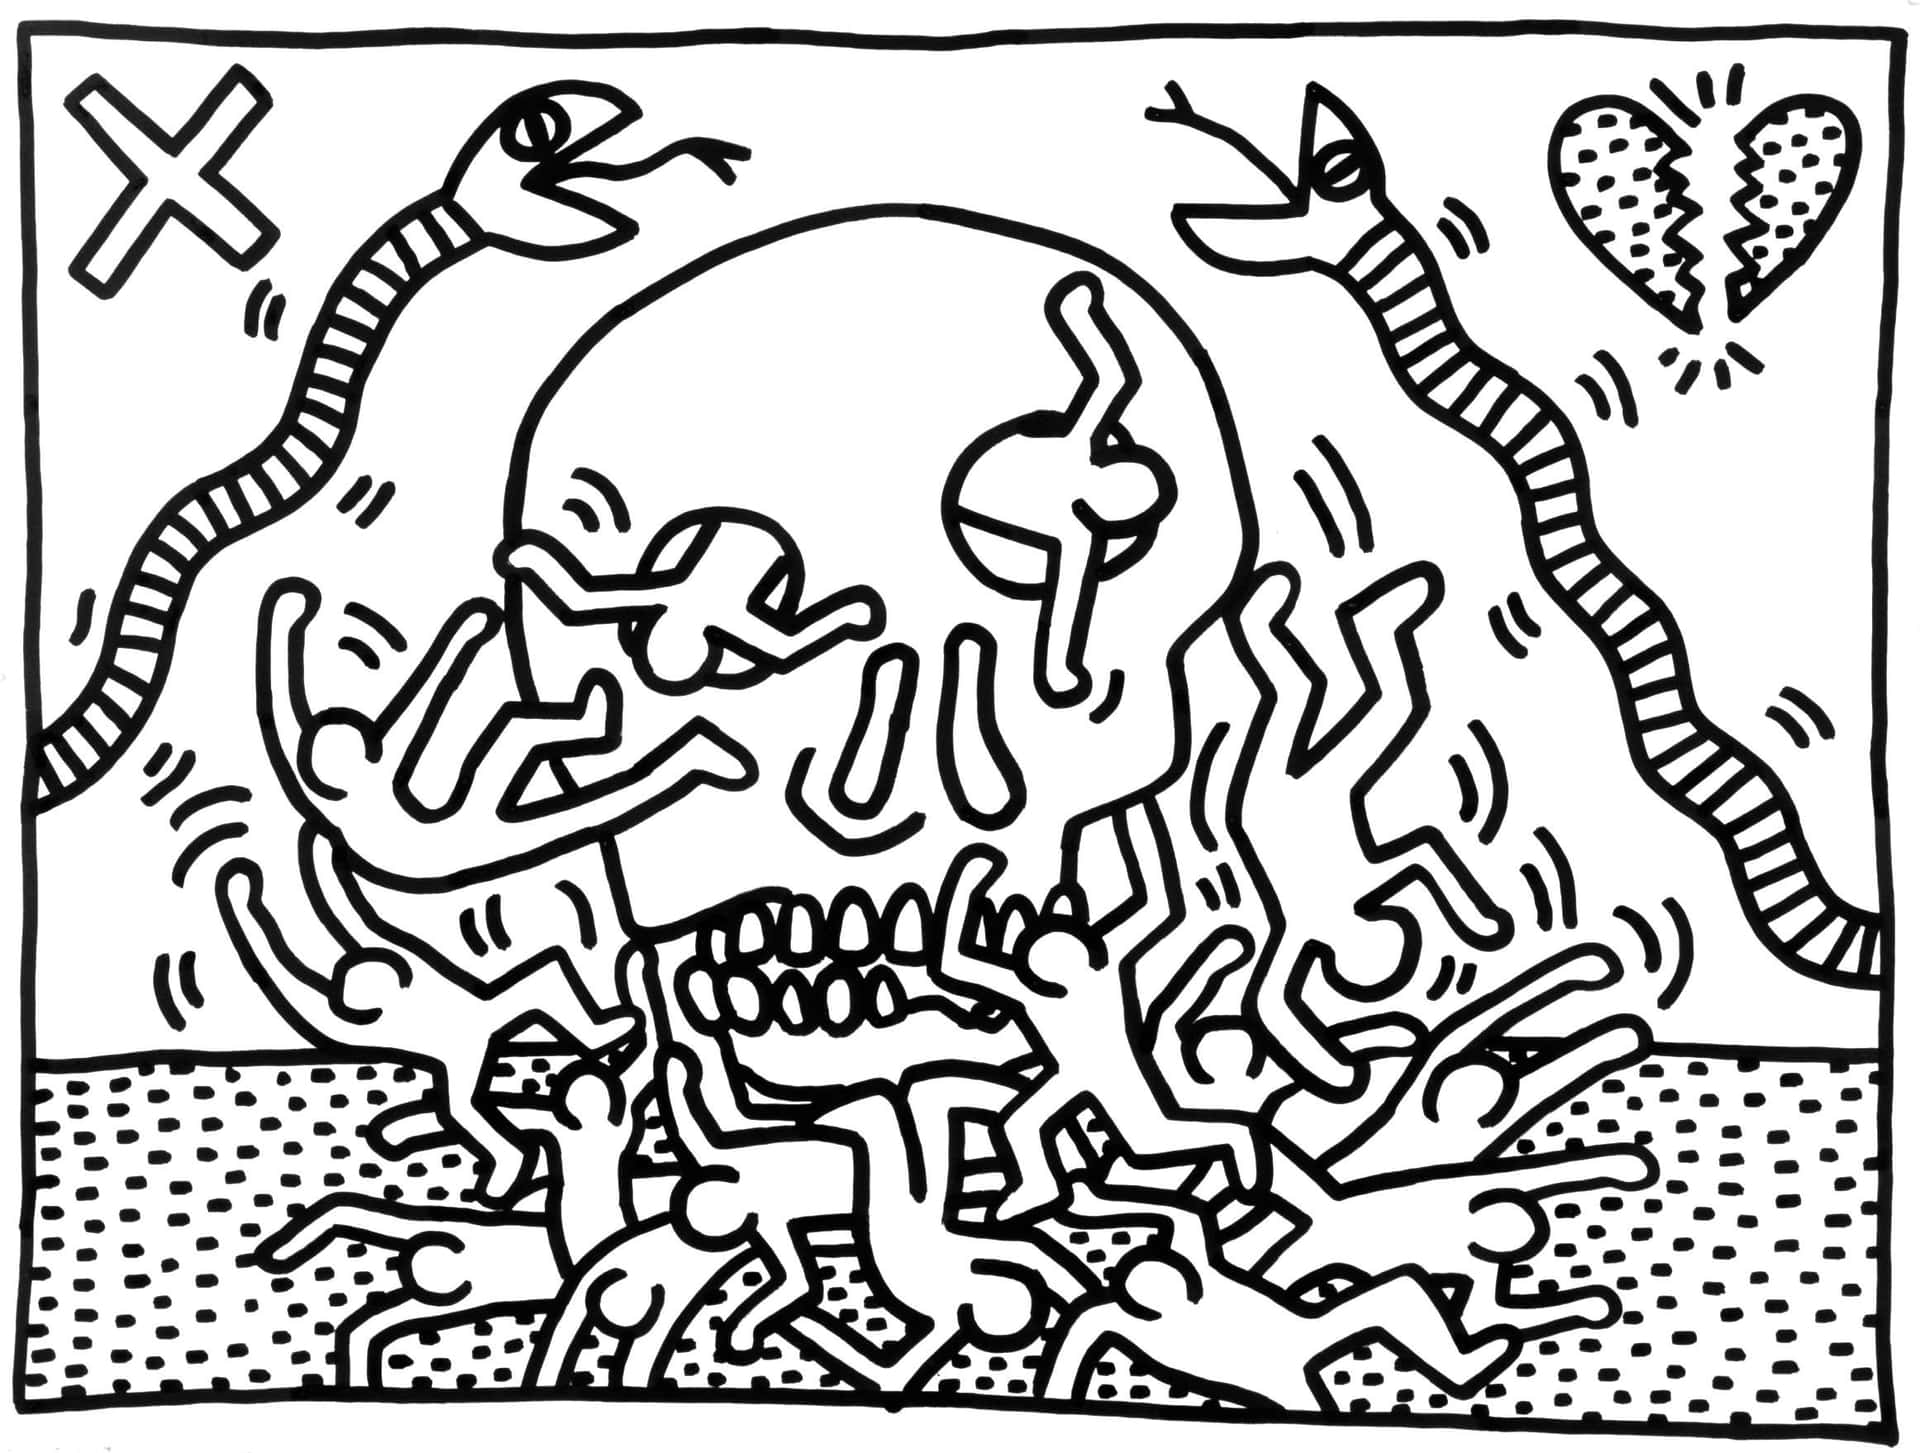 Keith Haring Intricate Doodle Art Wallpaper